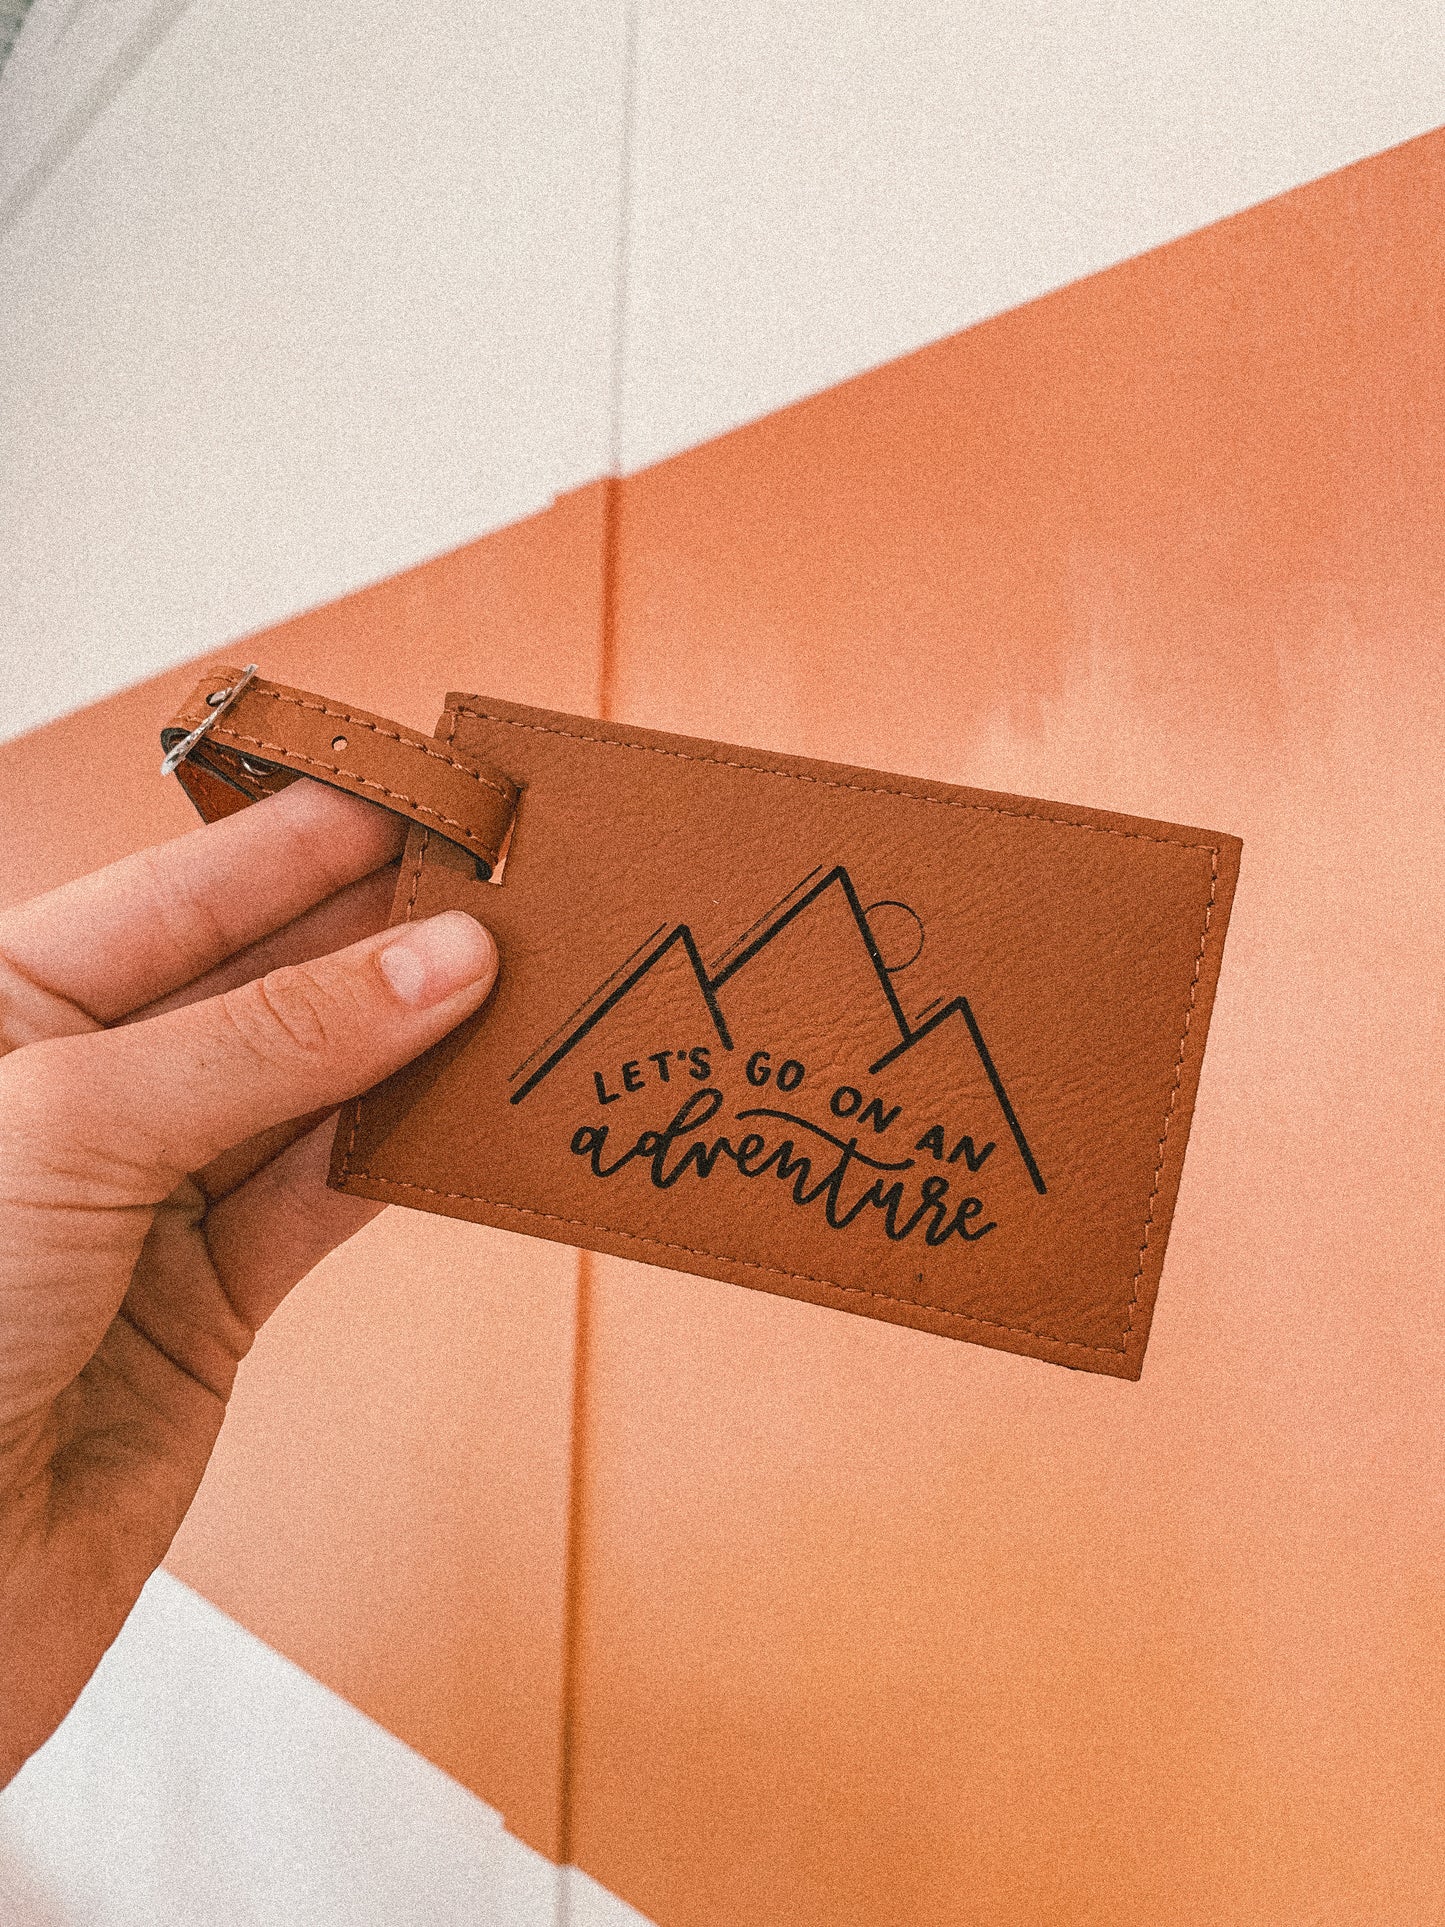 'Let's go on adventure' leather luggage tag